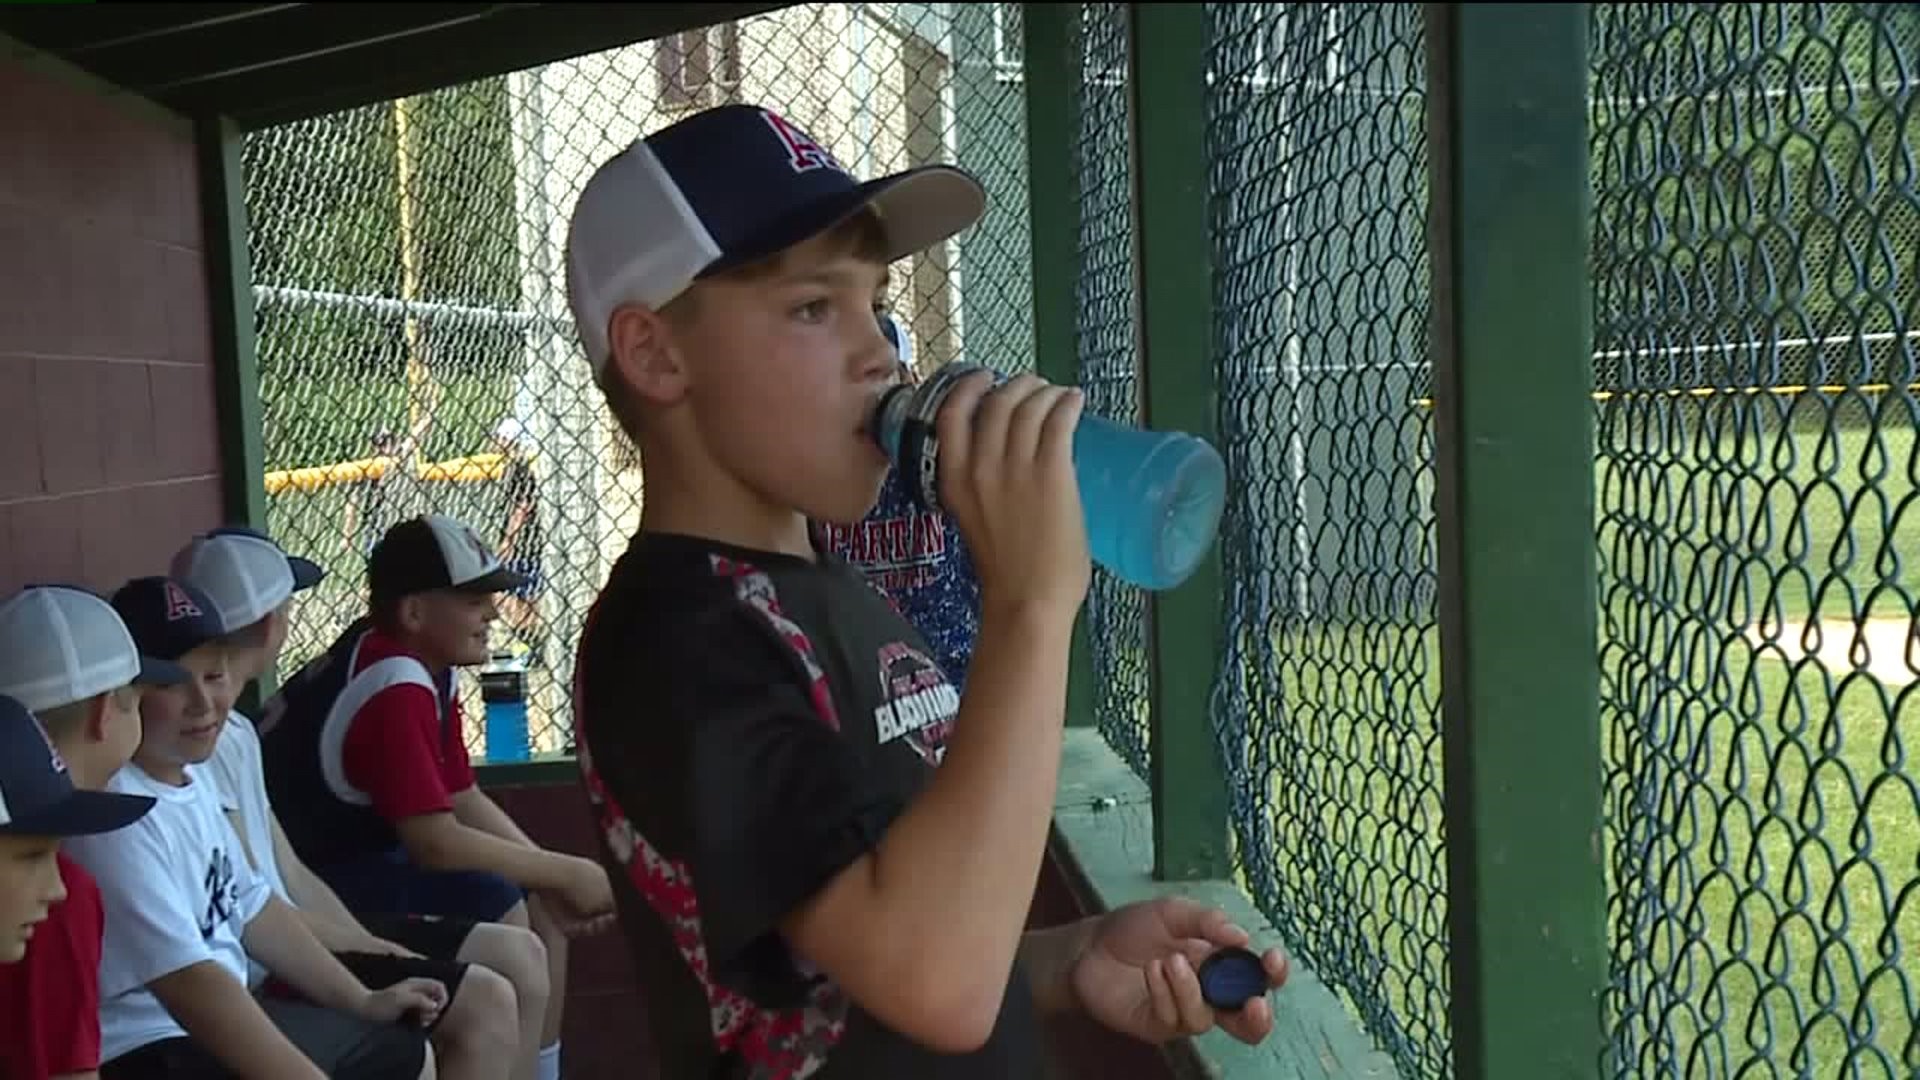 Helping Young Baseball Players Beat the Heat